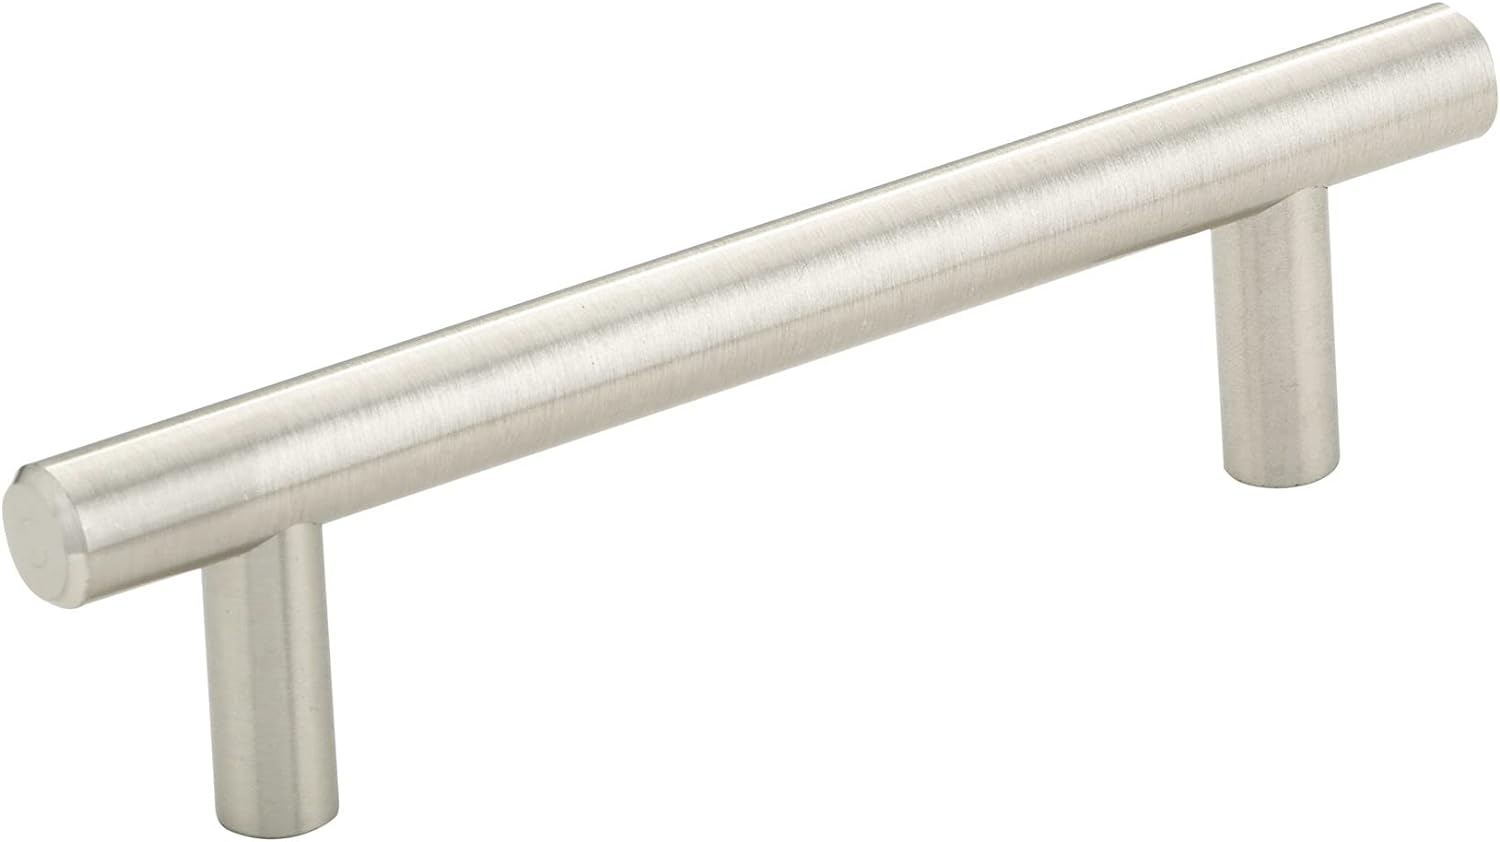 3 3/4-inch (96 mm) Center-to-Center Brushed Nickel Modern Cabinet and Drawer Bar Pull Handle for Kitchen, Bathroom, and Furniture - Industry Tile